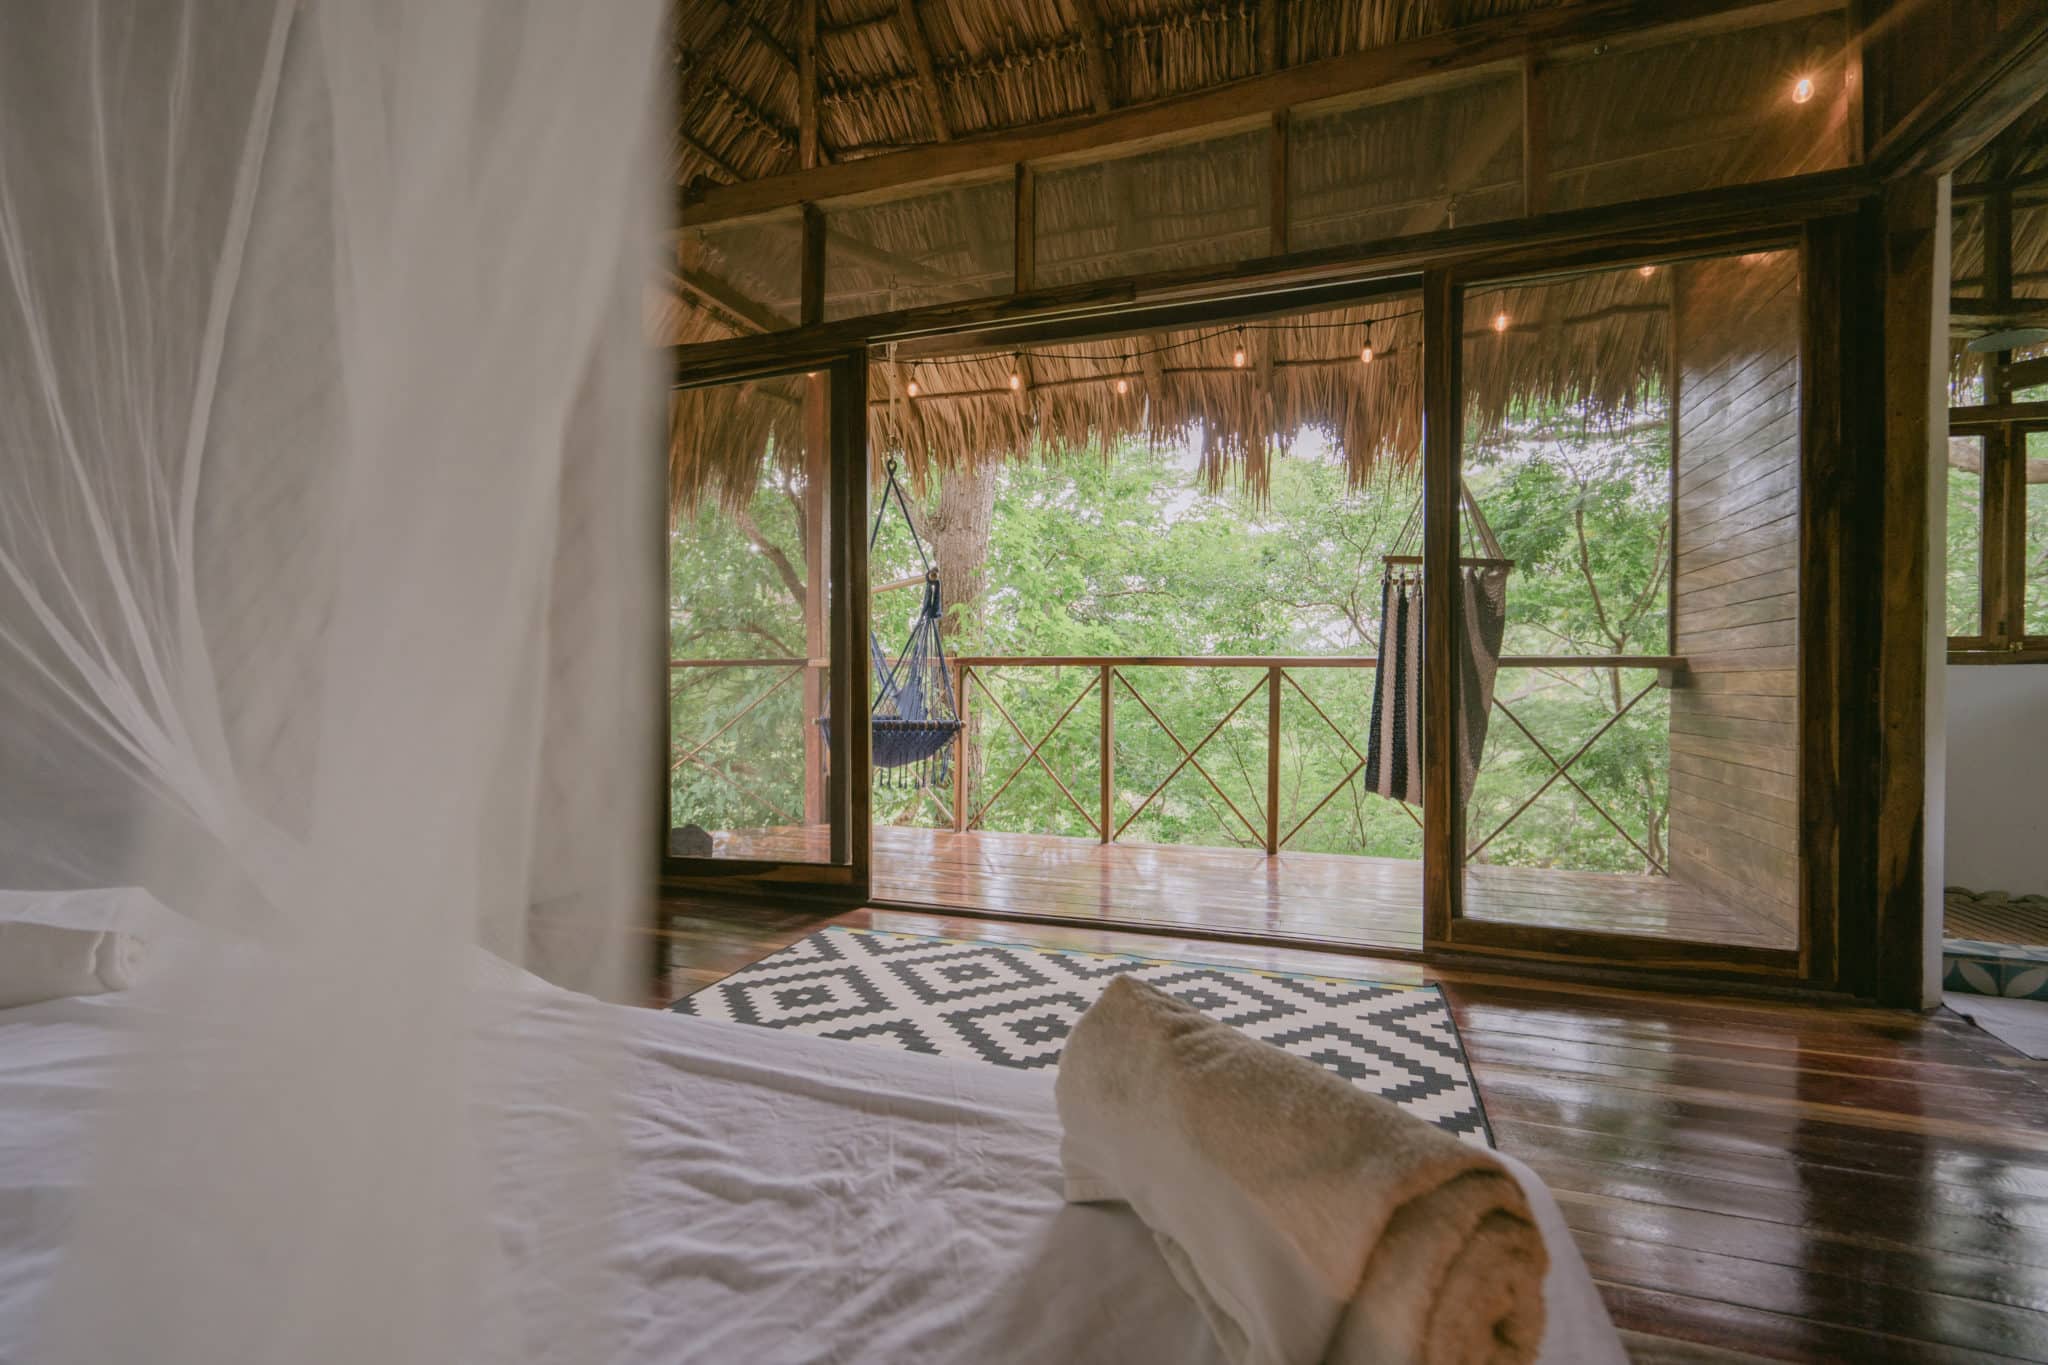 A bed with mosquito net on the cabana room in Rapture Surf resort